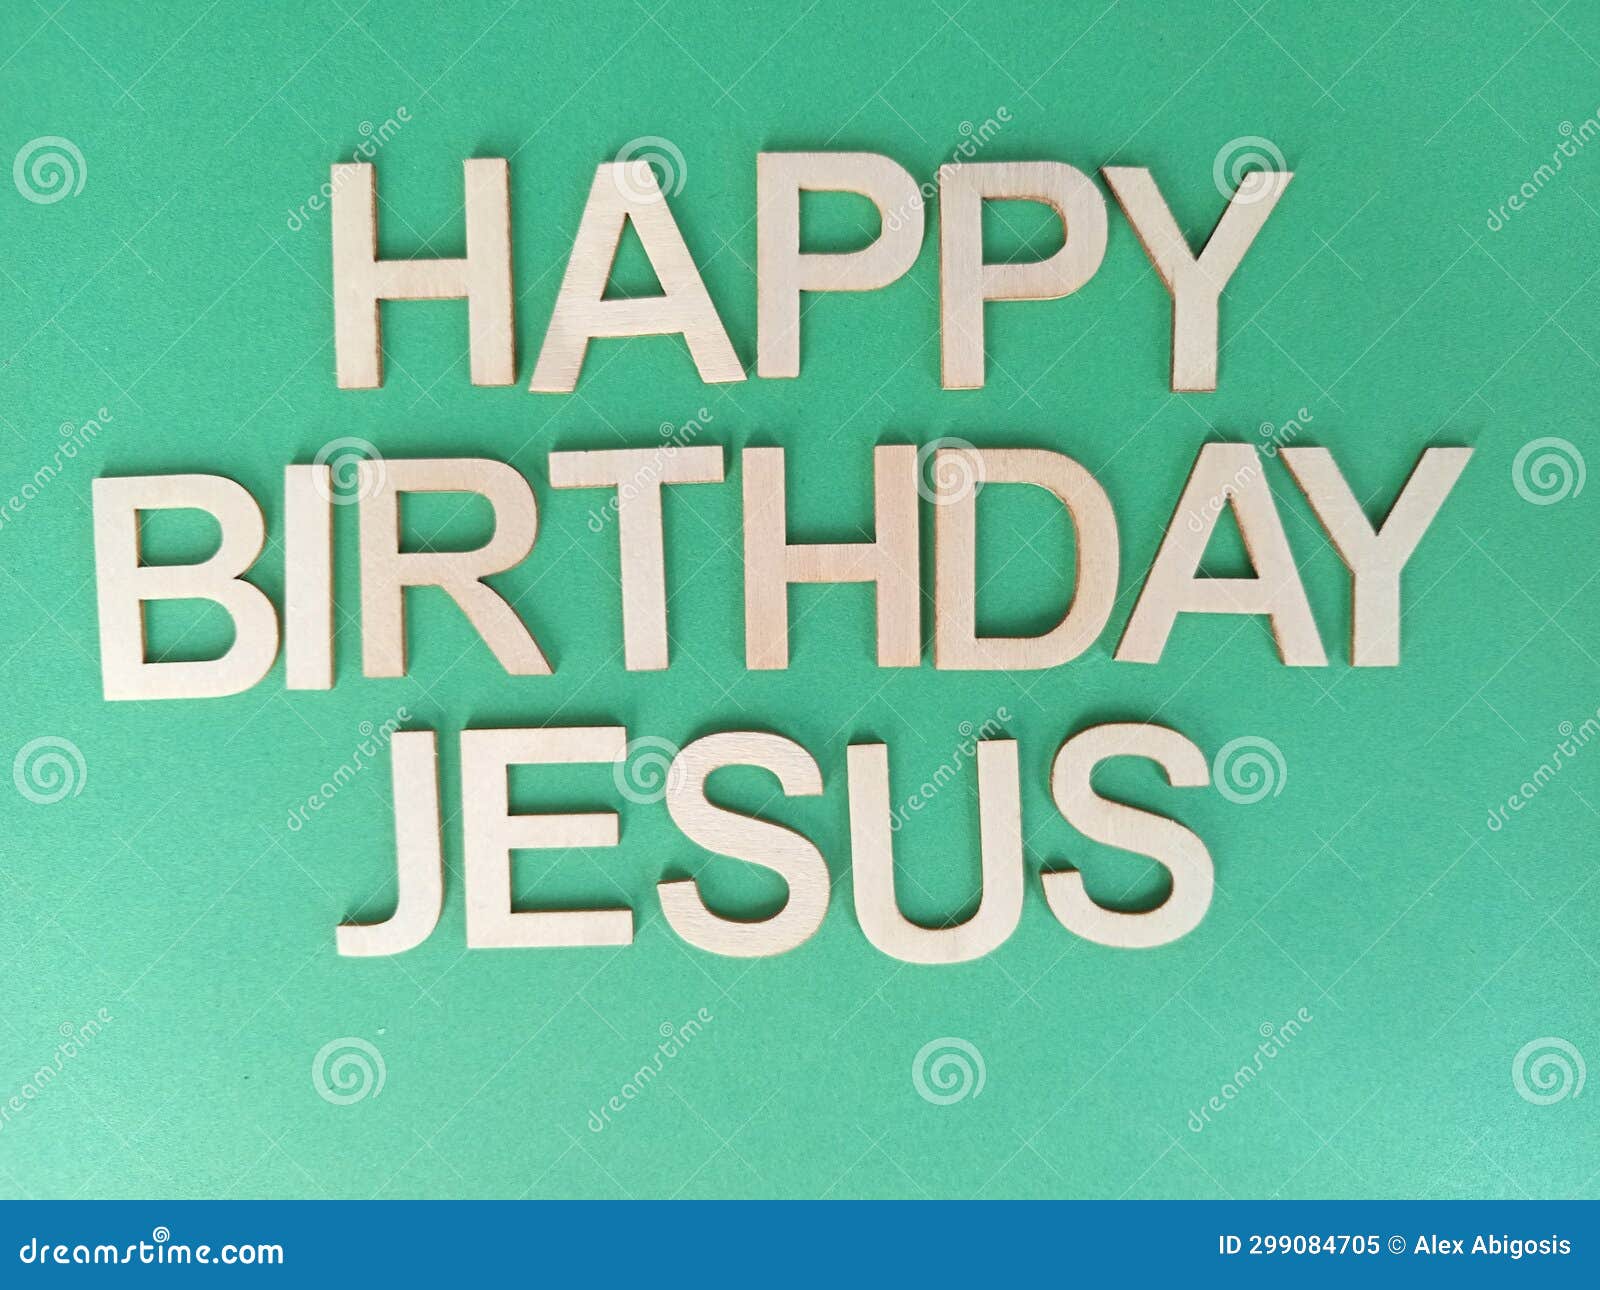 Happy Birthday Jesus Message on a Green Background Stock Image - Image ...